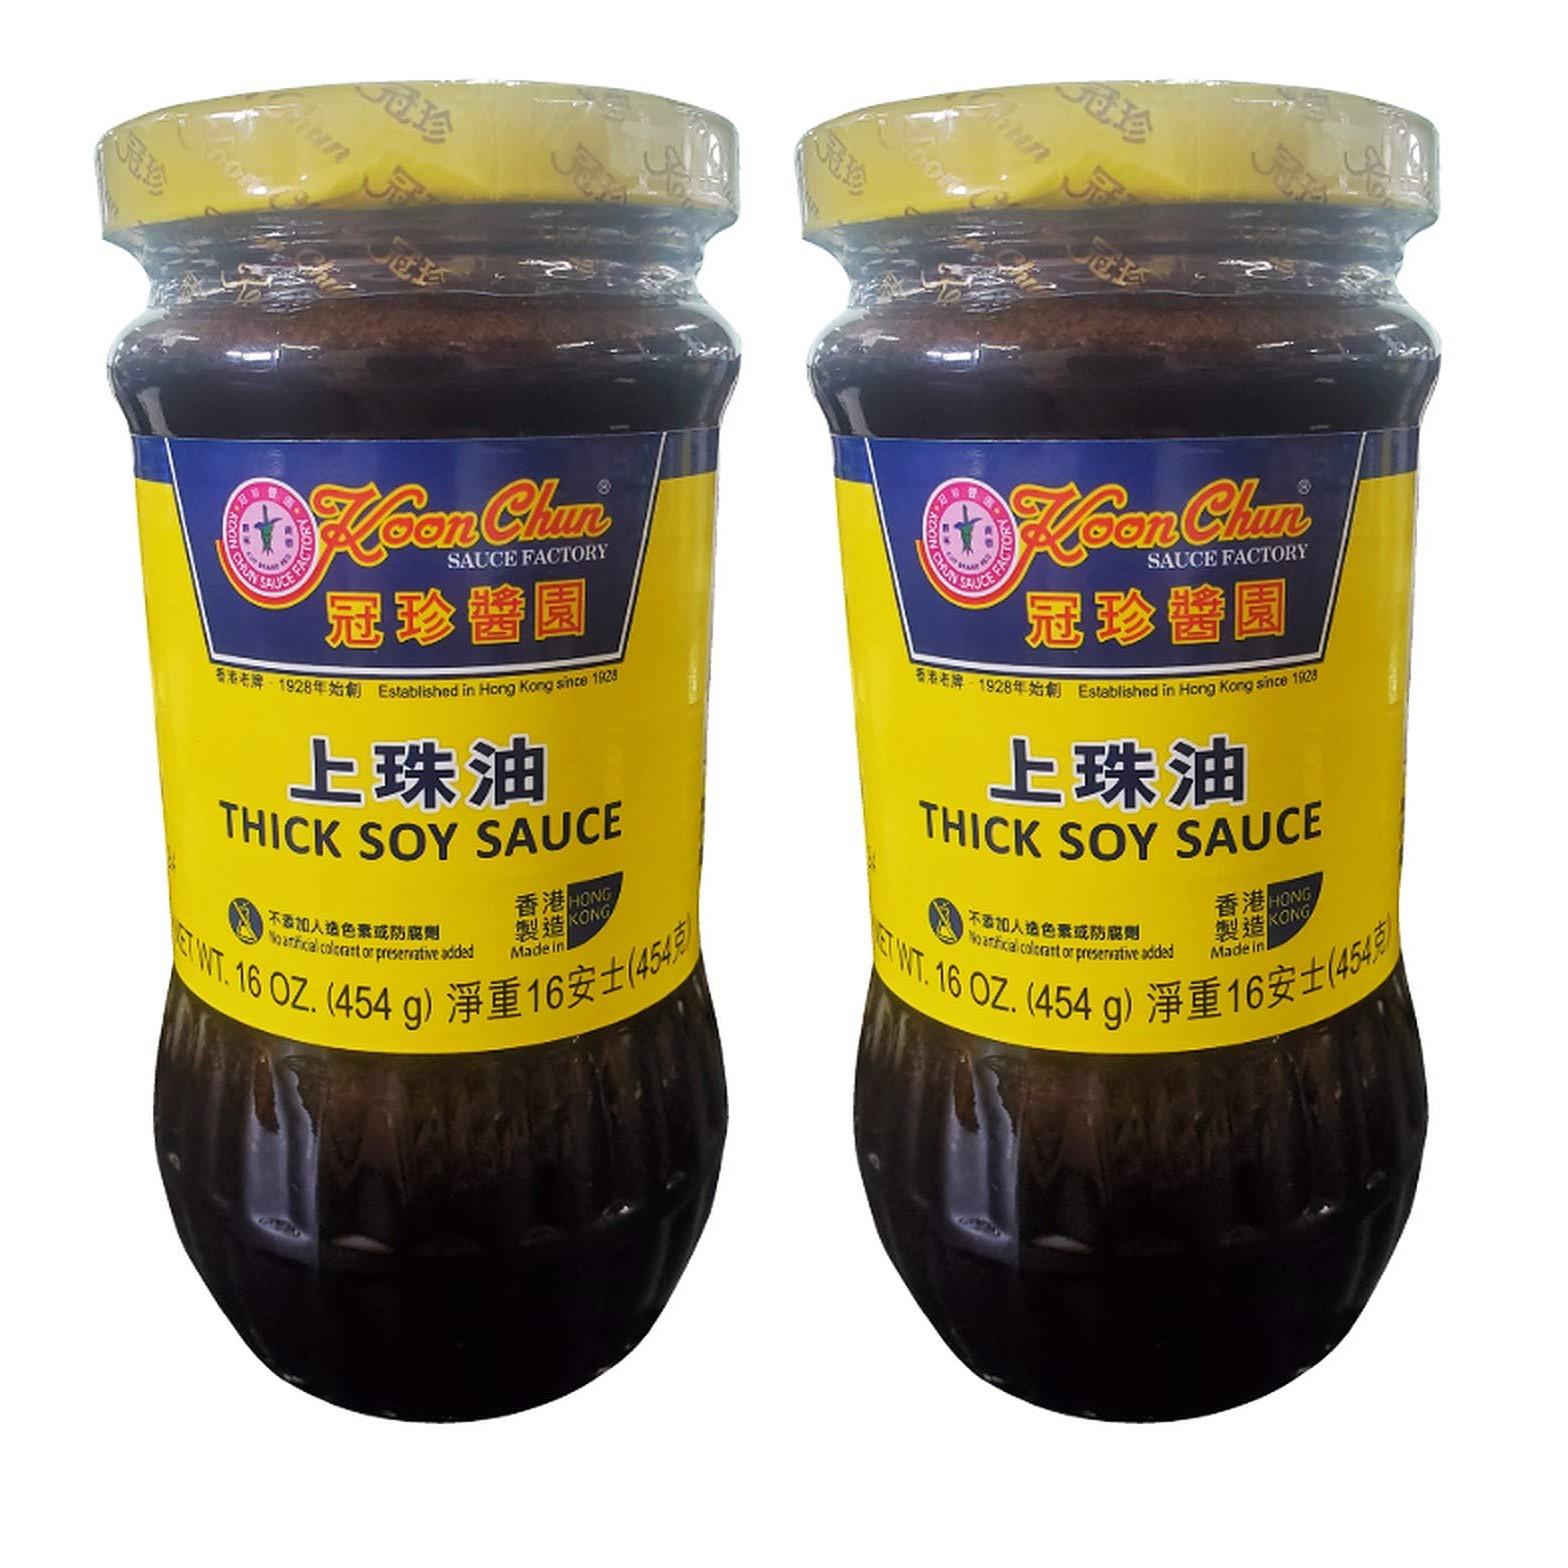 Koon Chun Thick Soy Sauce (2 Pack, Total of 32oz)